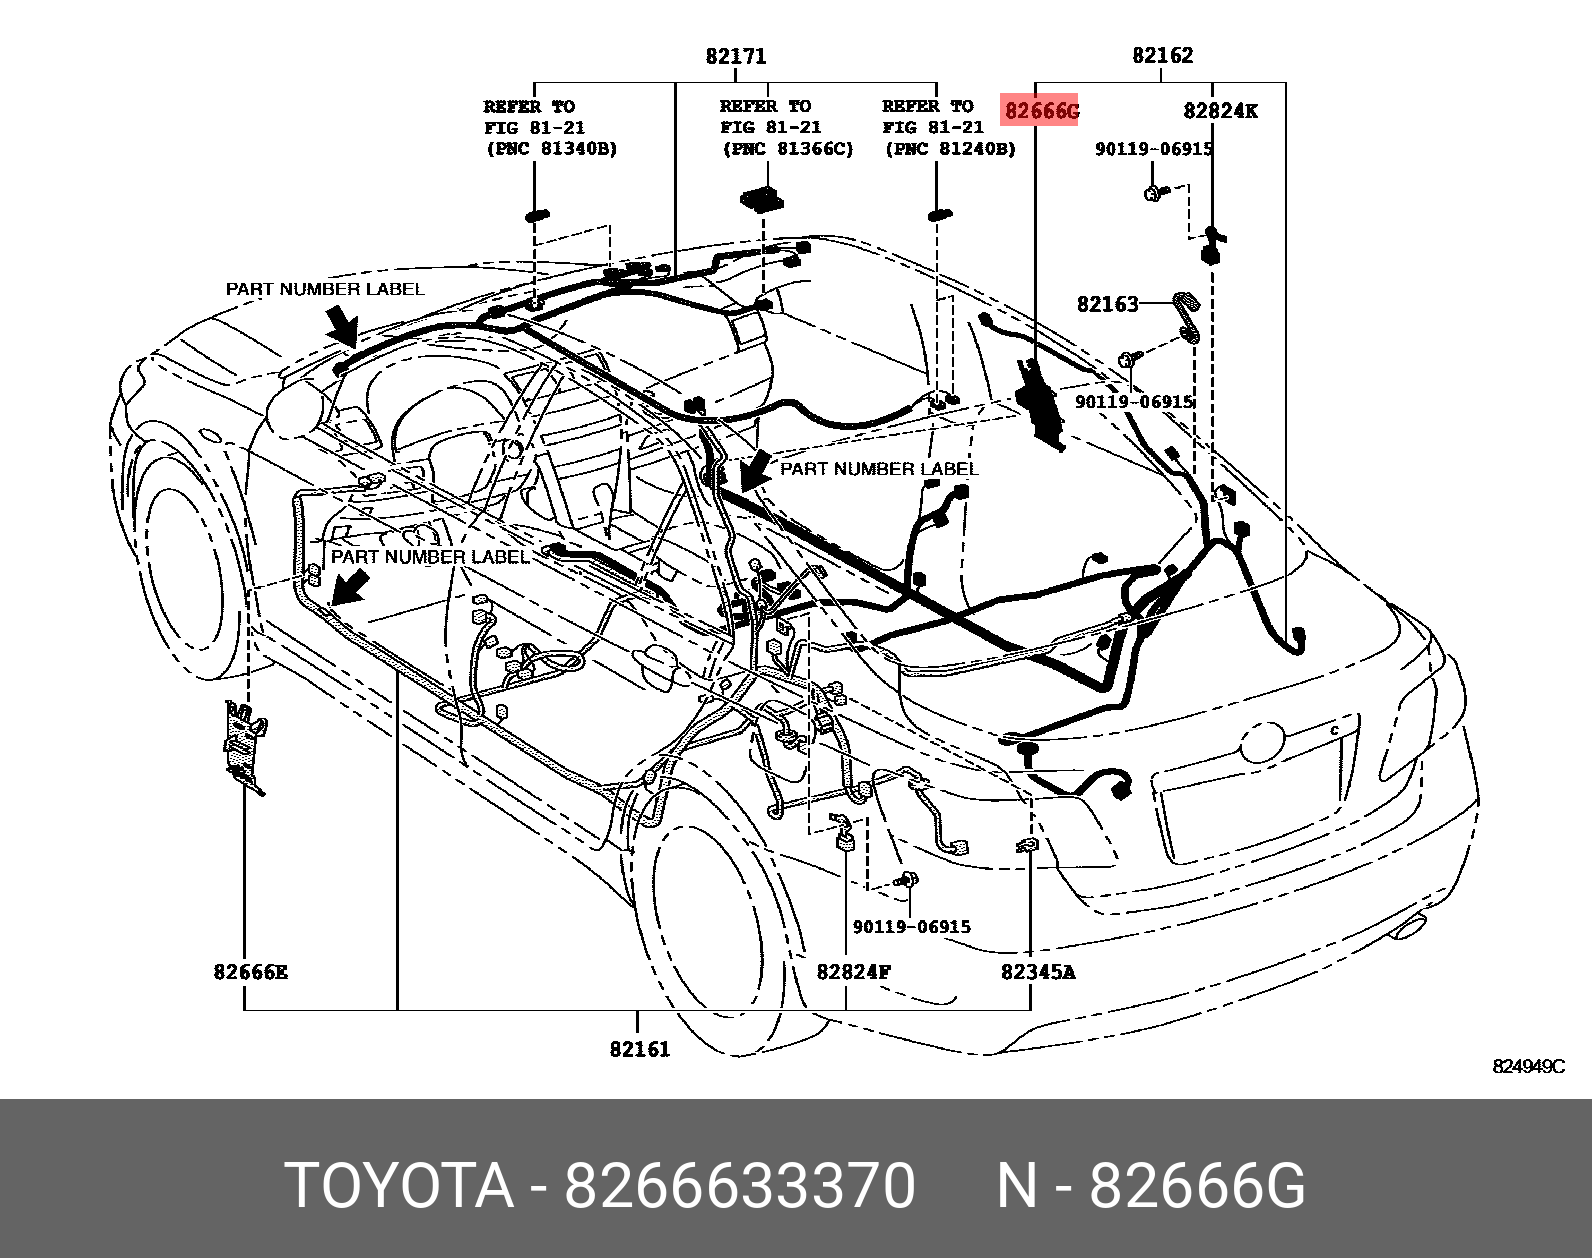 CAMRY 200601 - 201108, HOLDER, CONNECTOR NO.8